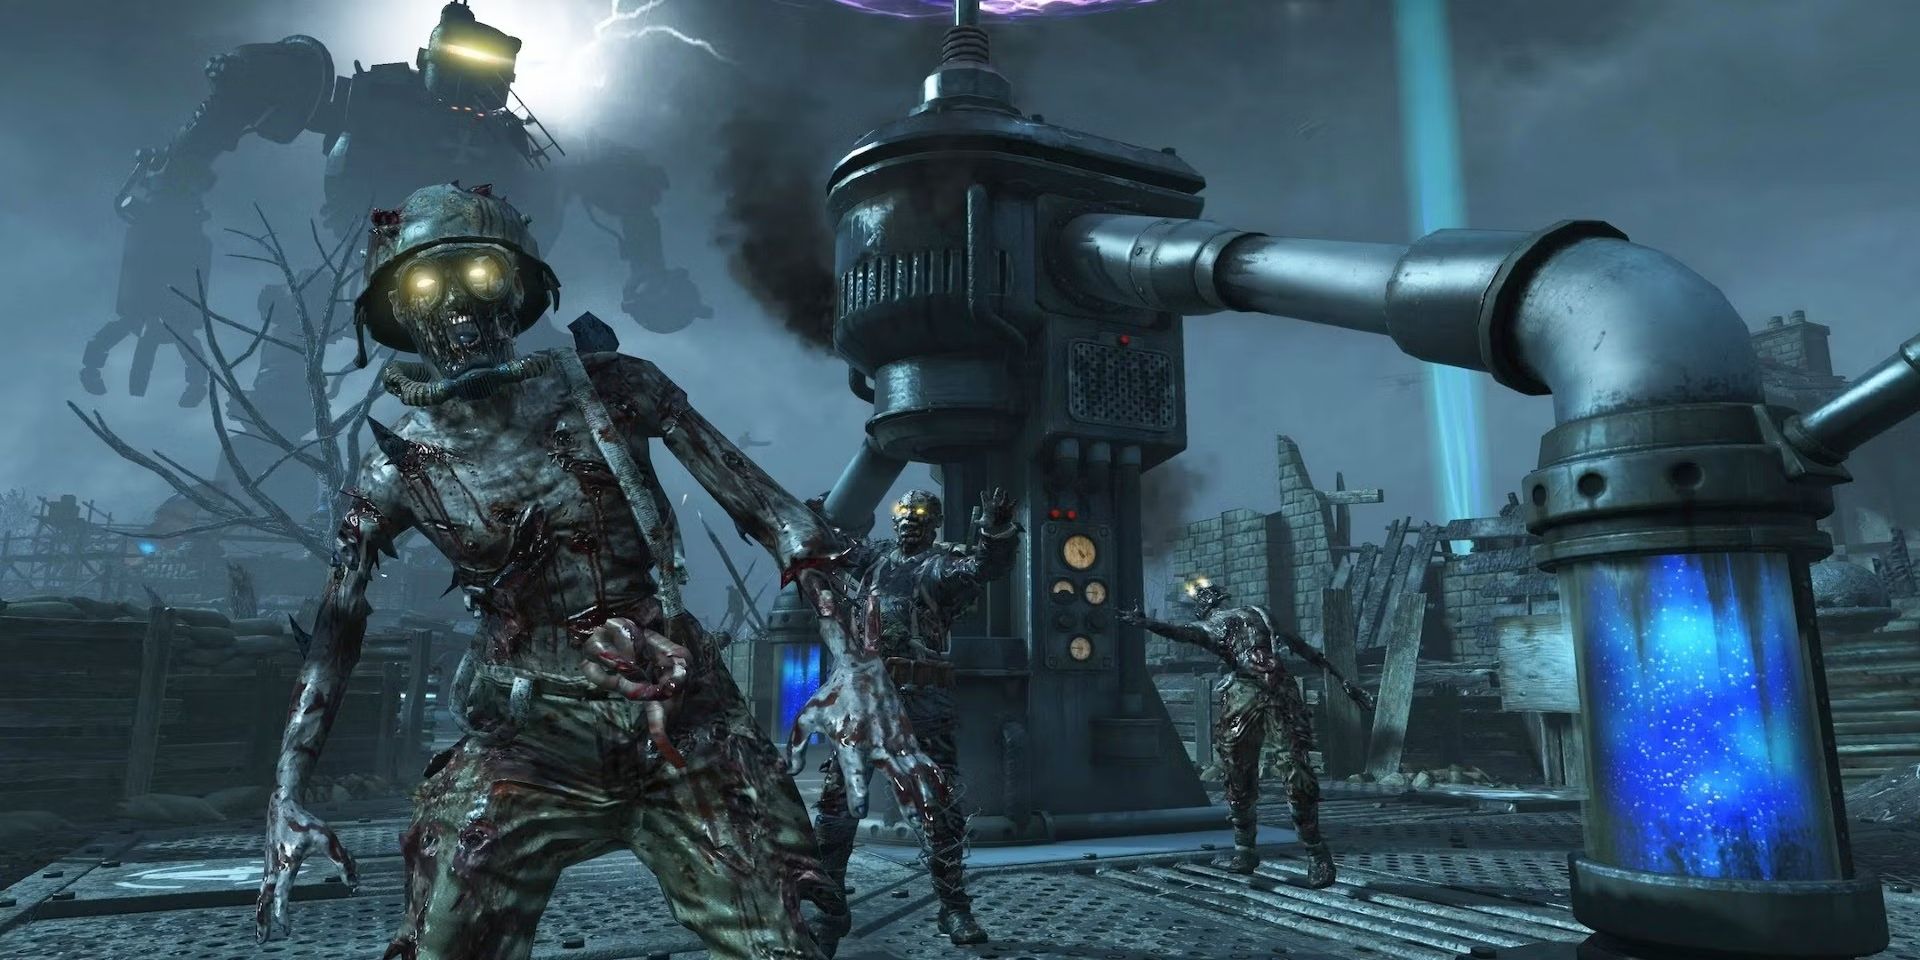 A zombie in front of a looming giant robot in the background from the video game Call of Duty Black Ops 2.